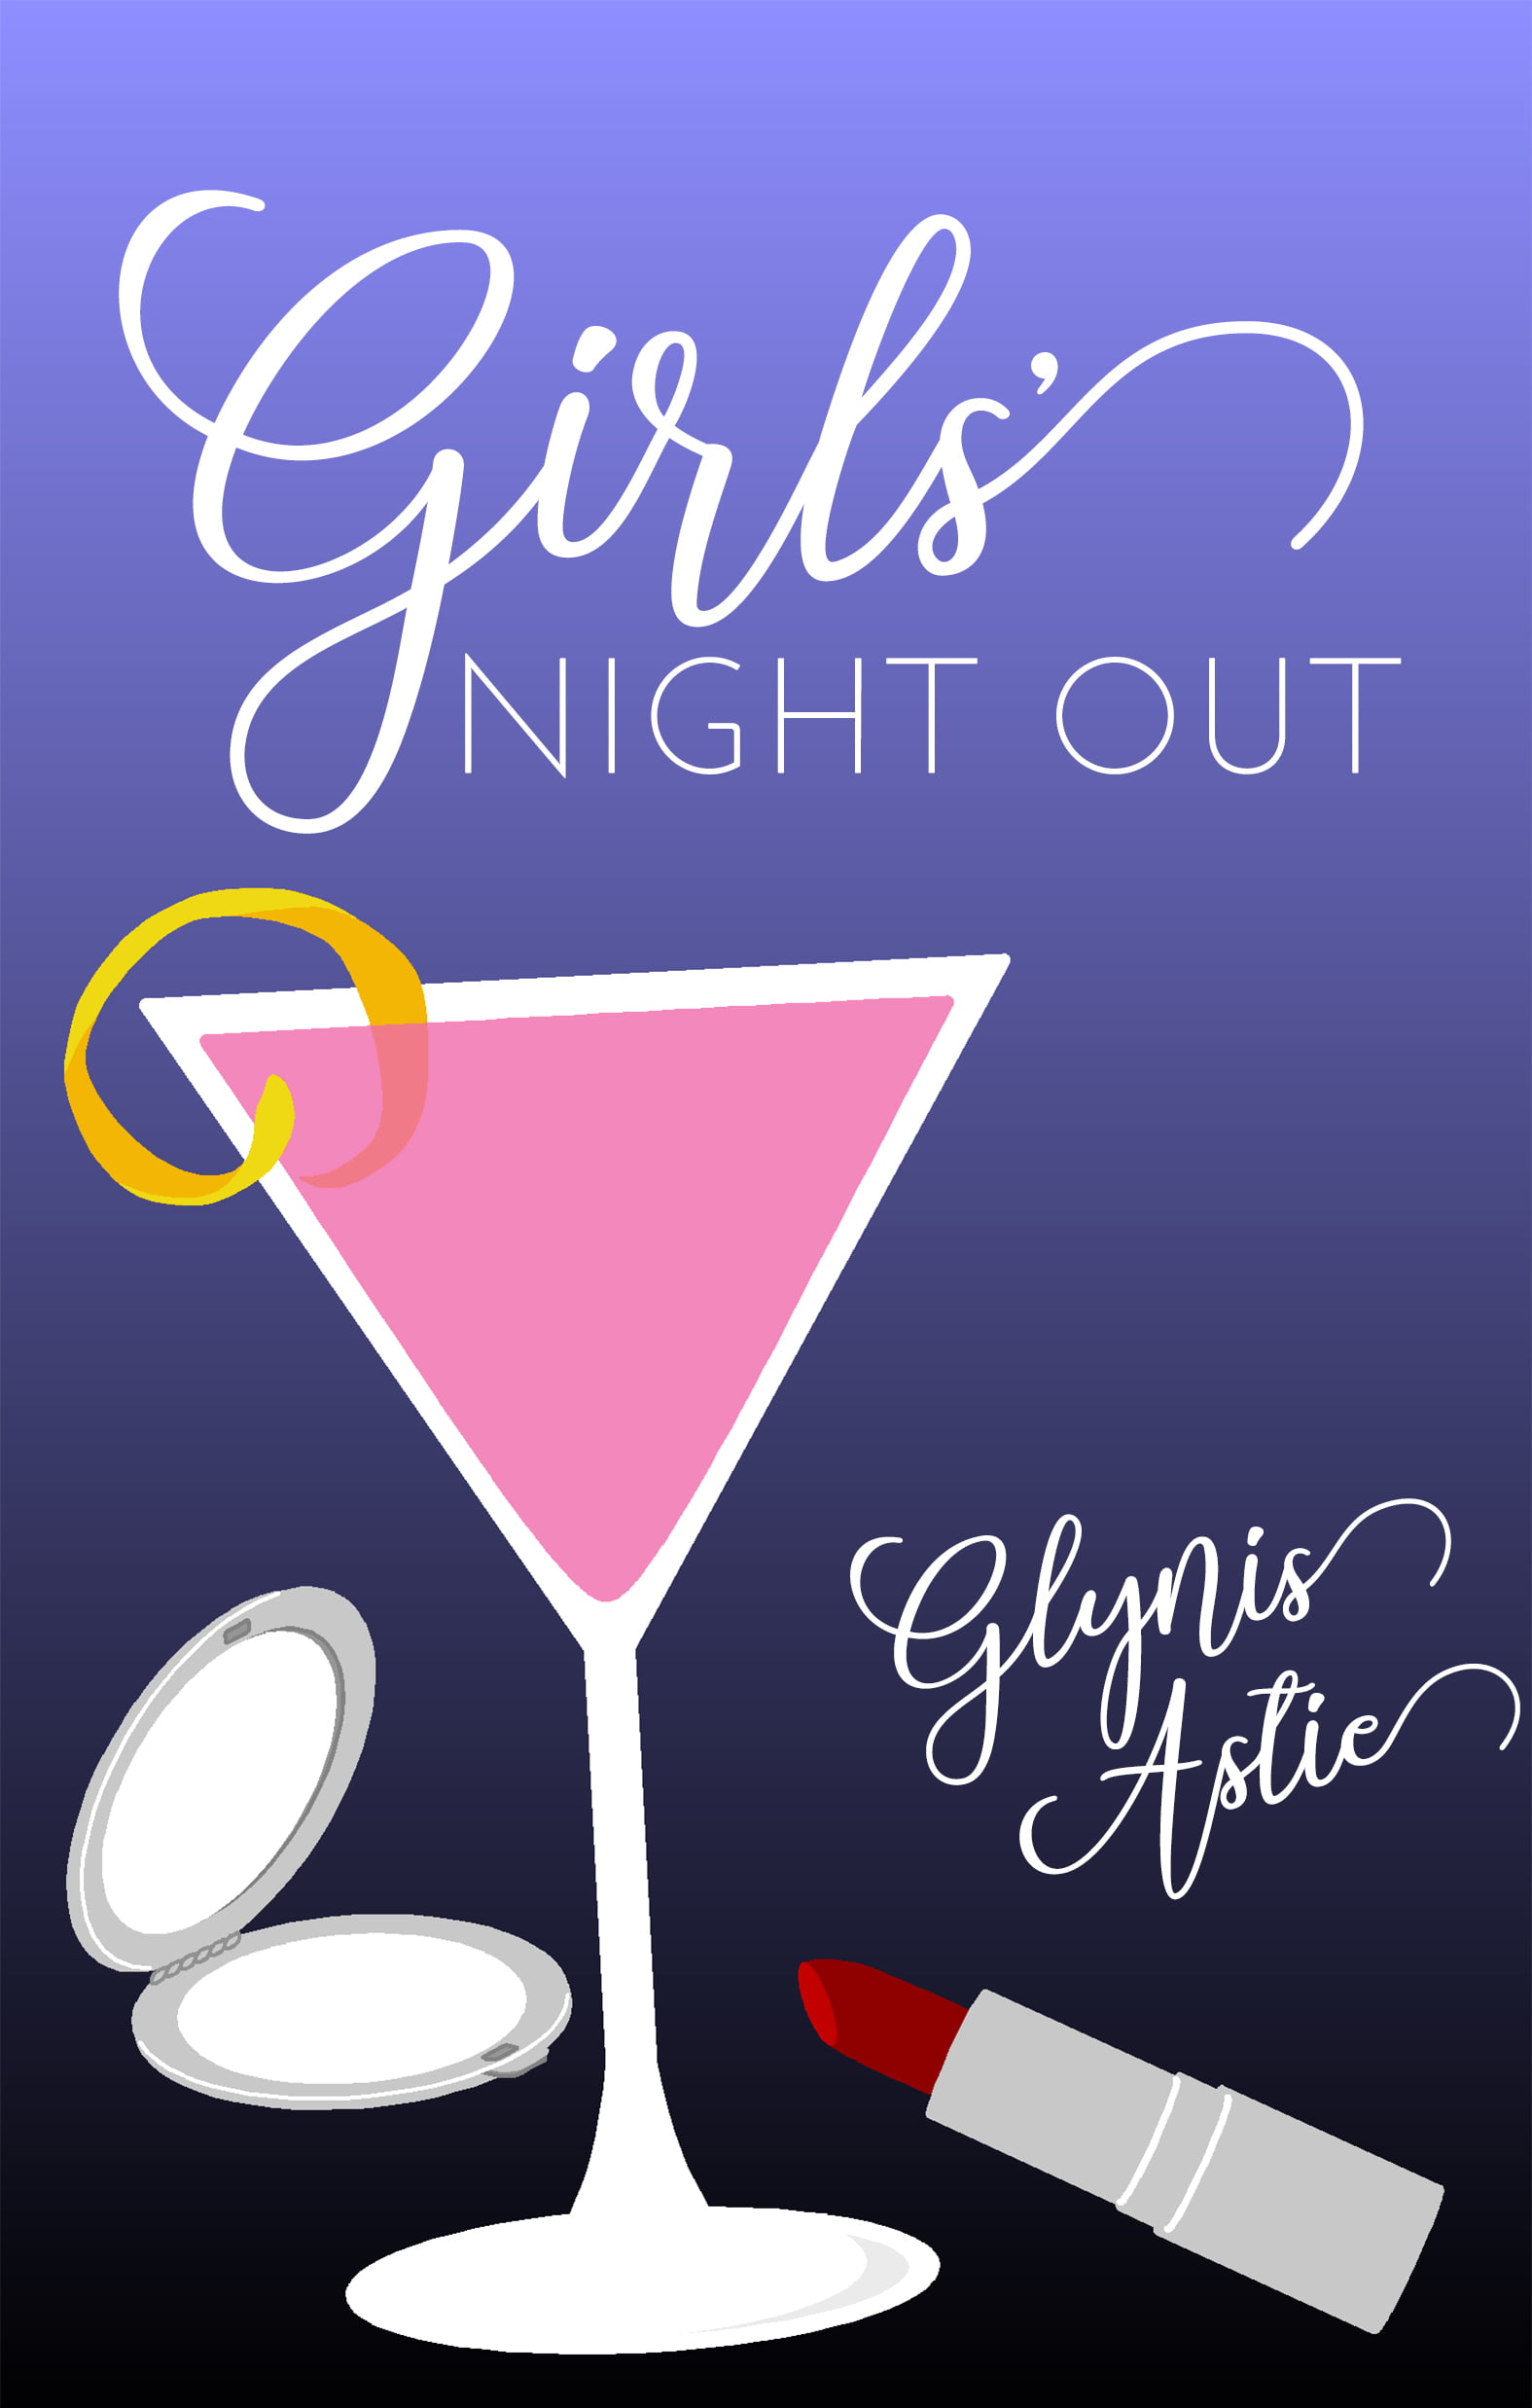 girls' night out glynis astie